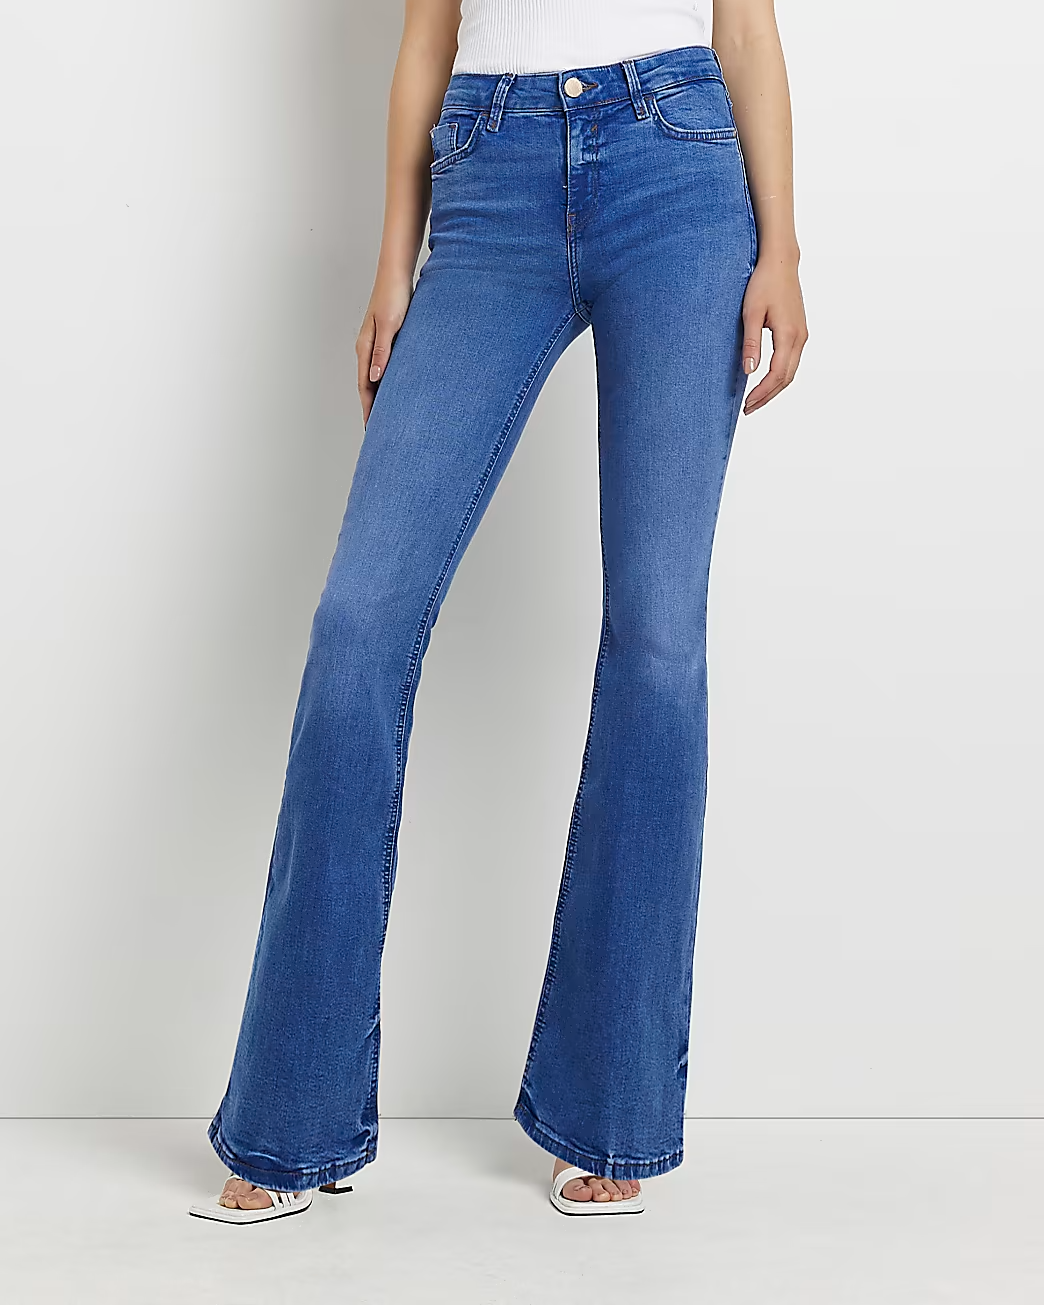 PERFECT JEANS FOR YOUR BODY TYPE